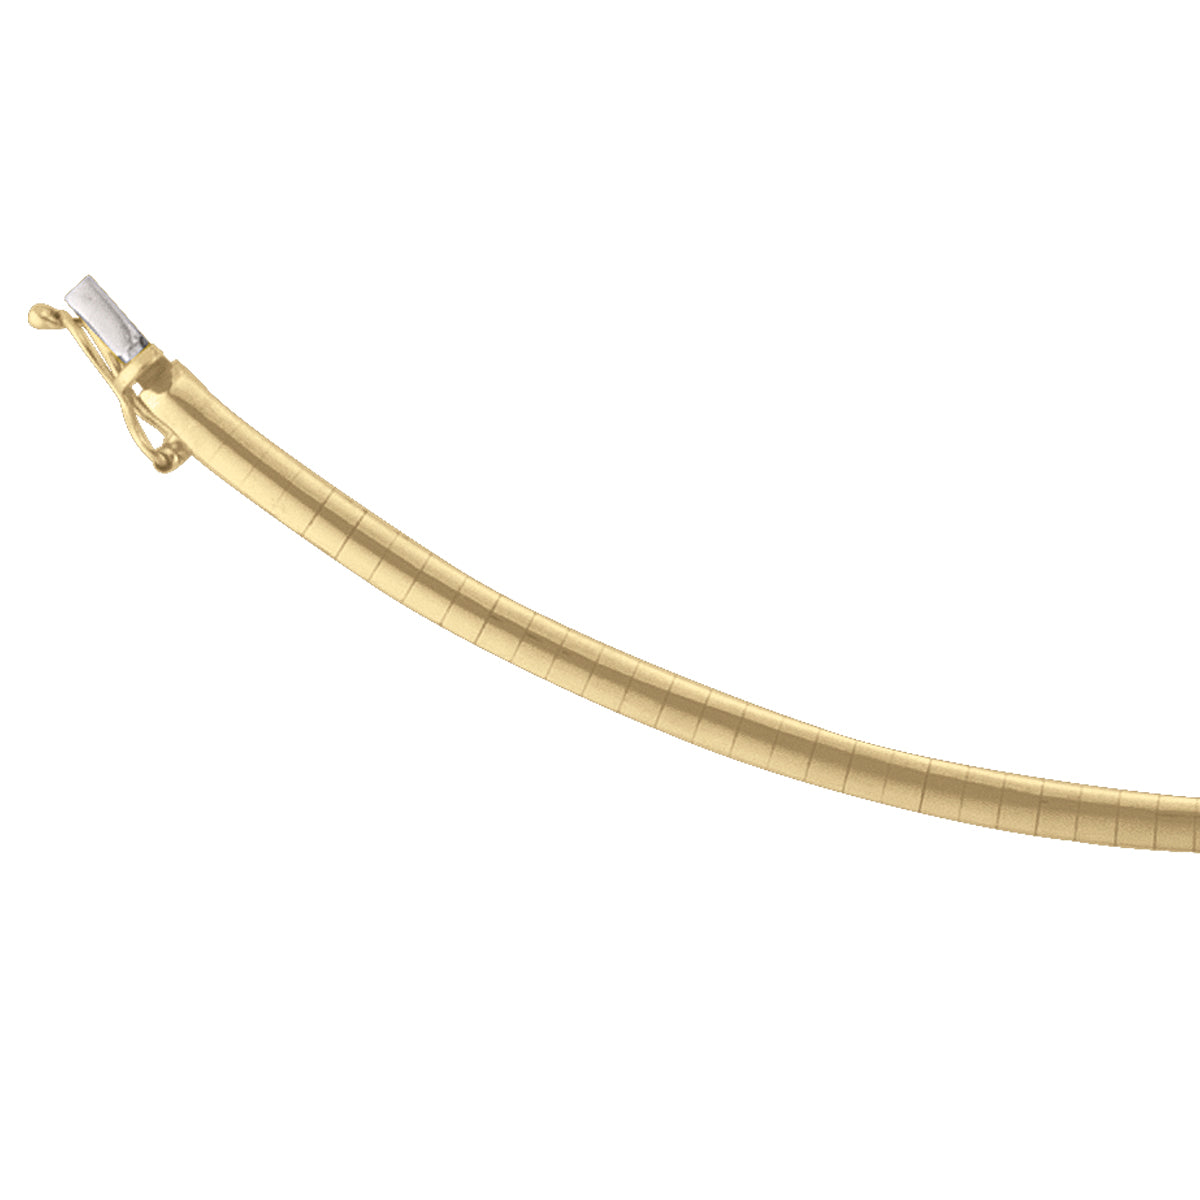 NECKALES YELLOW GOLD SOLID DOMED OMEGA 